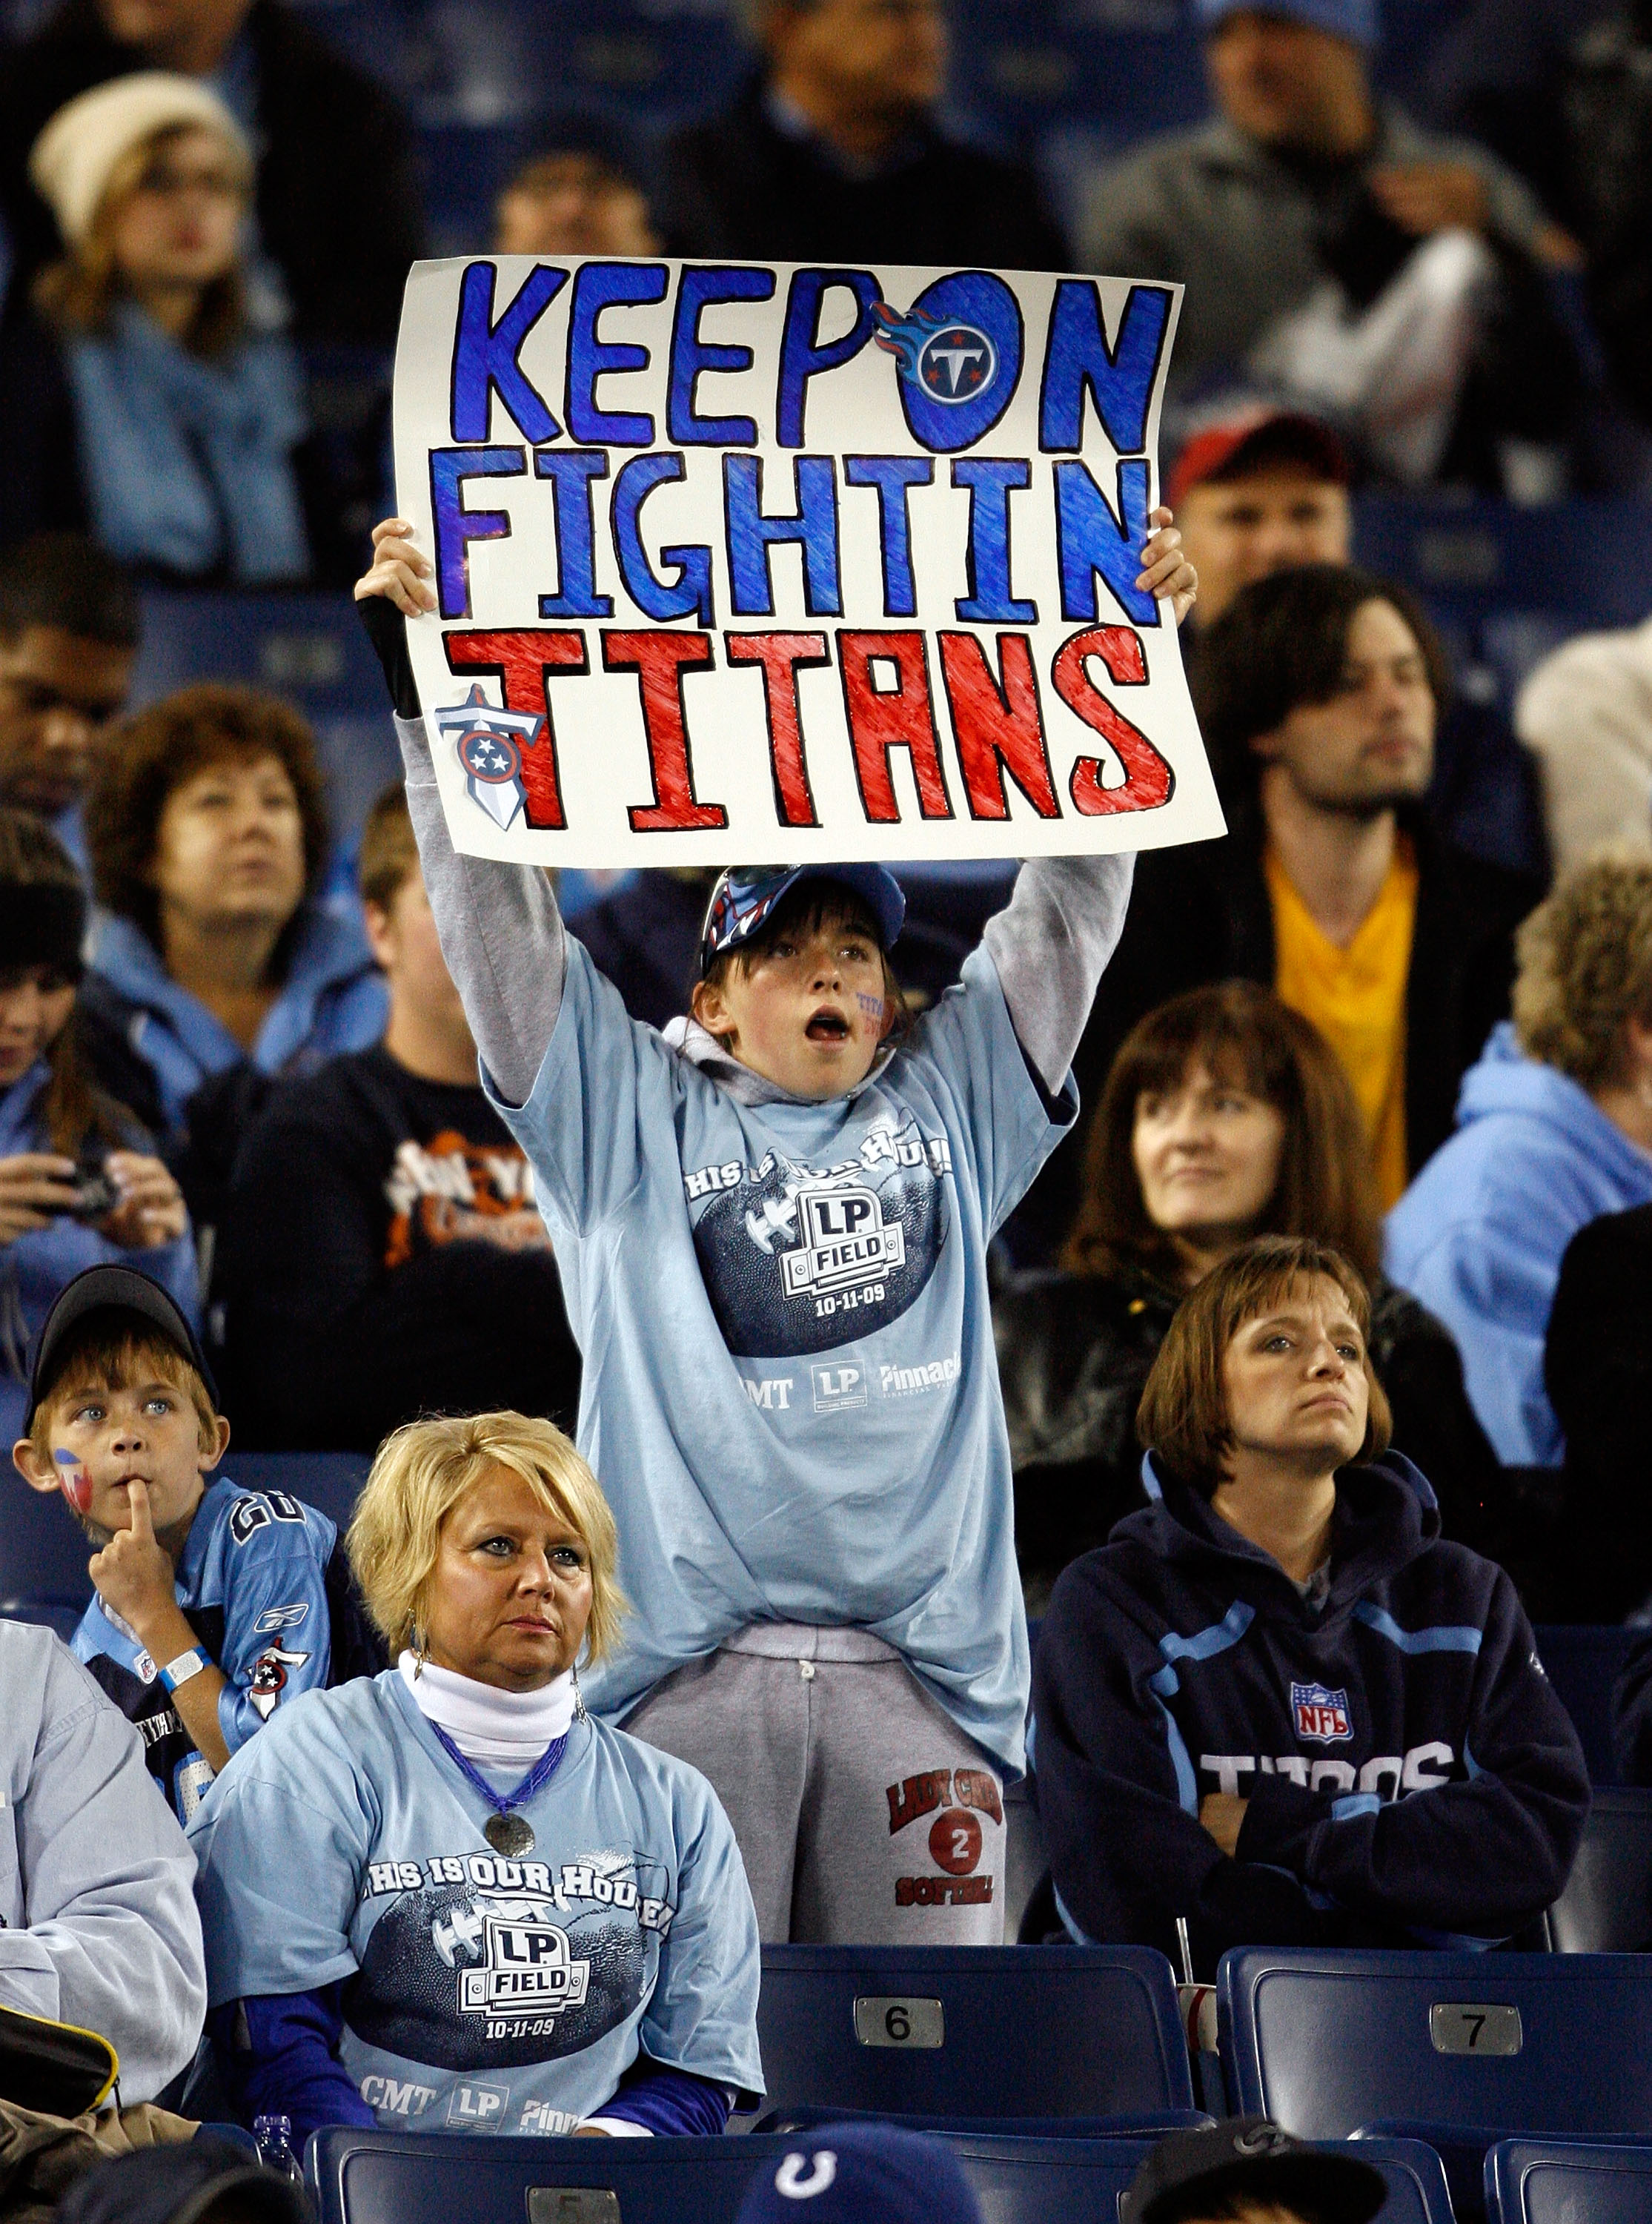 NASHVILLE, TN - OCTOBER 11:  A Tennessee Titans fan shows her support during the 31-9 loss to the Indianapolis Colts at LP Field on October 11, 2009 in Nashville, Tennessee.  (Photo by Andy Lyons/Getty Images)